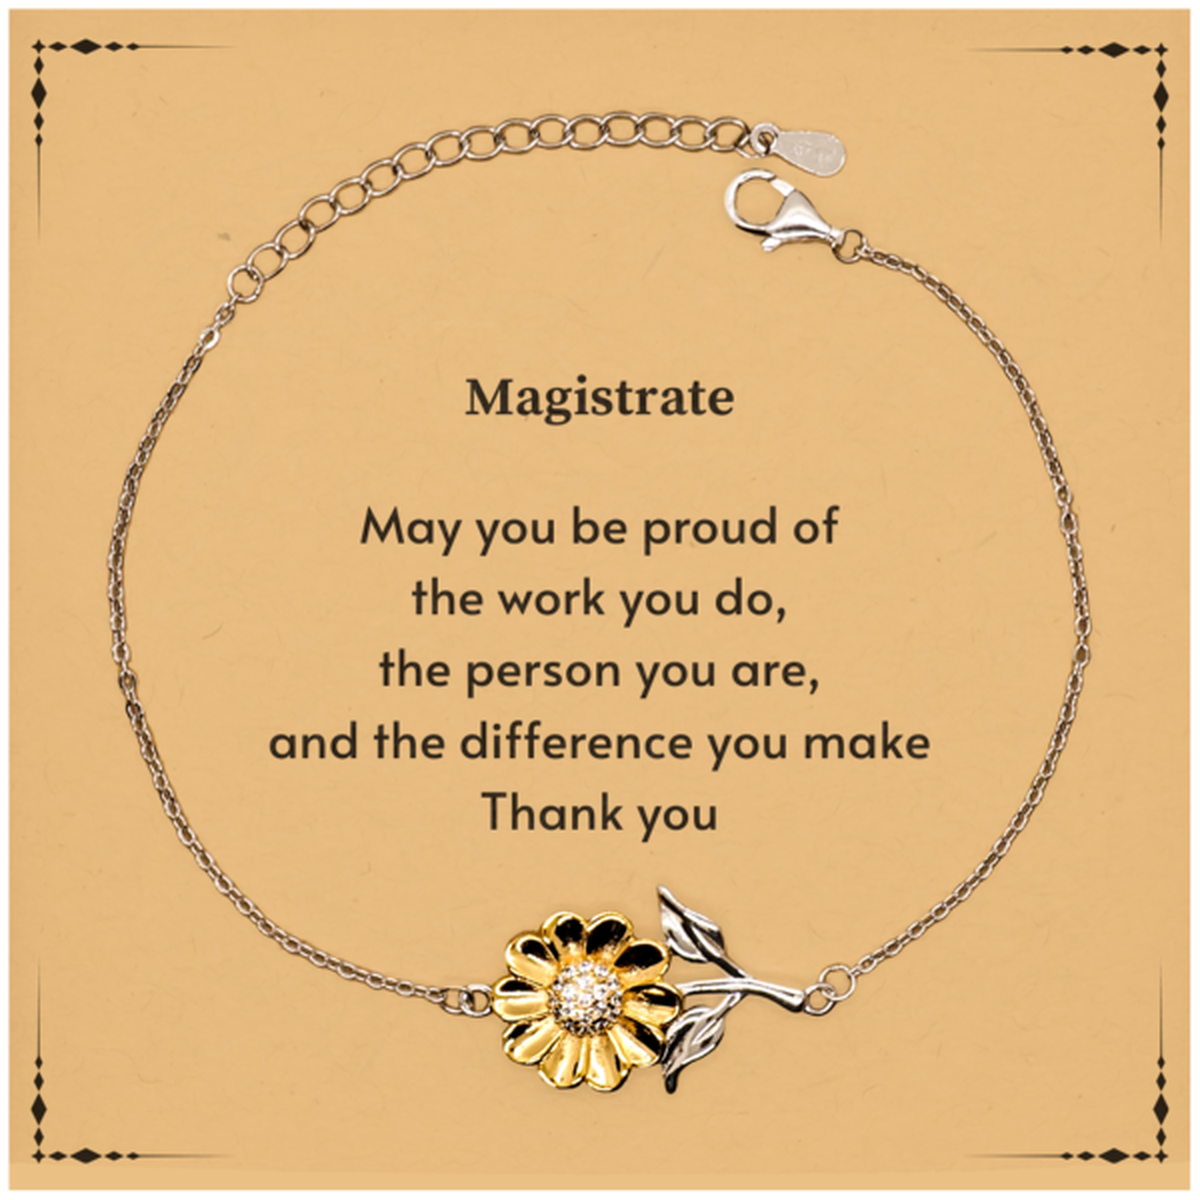 Heartwarming Sunflower Bracelet Retirement Coworkers Gifts for Magistrate, Magistrate May You be proud of the work you do, the person you are Gifts for Boss Men Women Friends